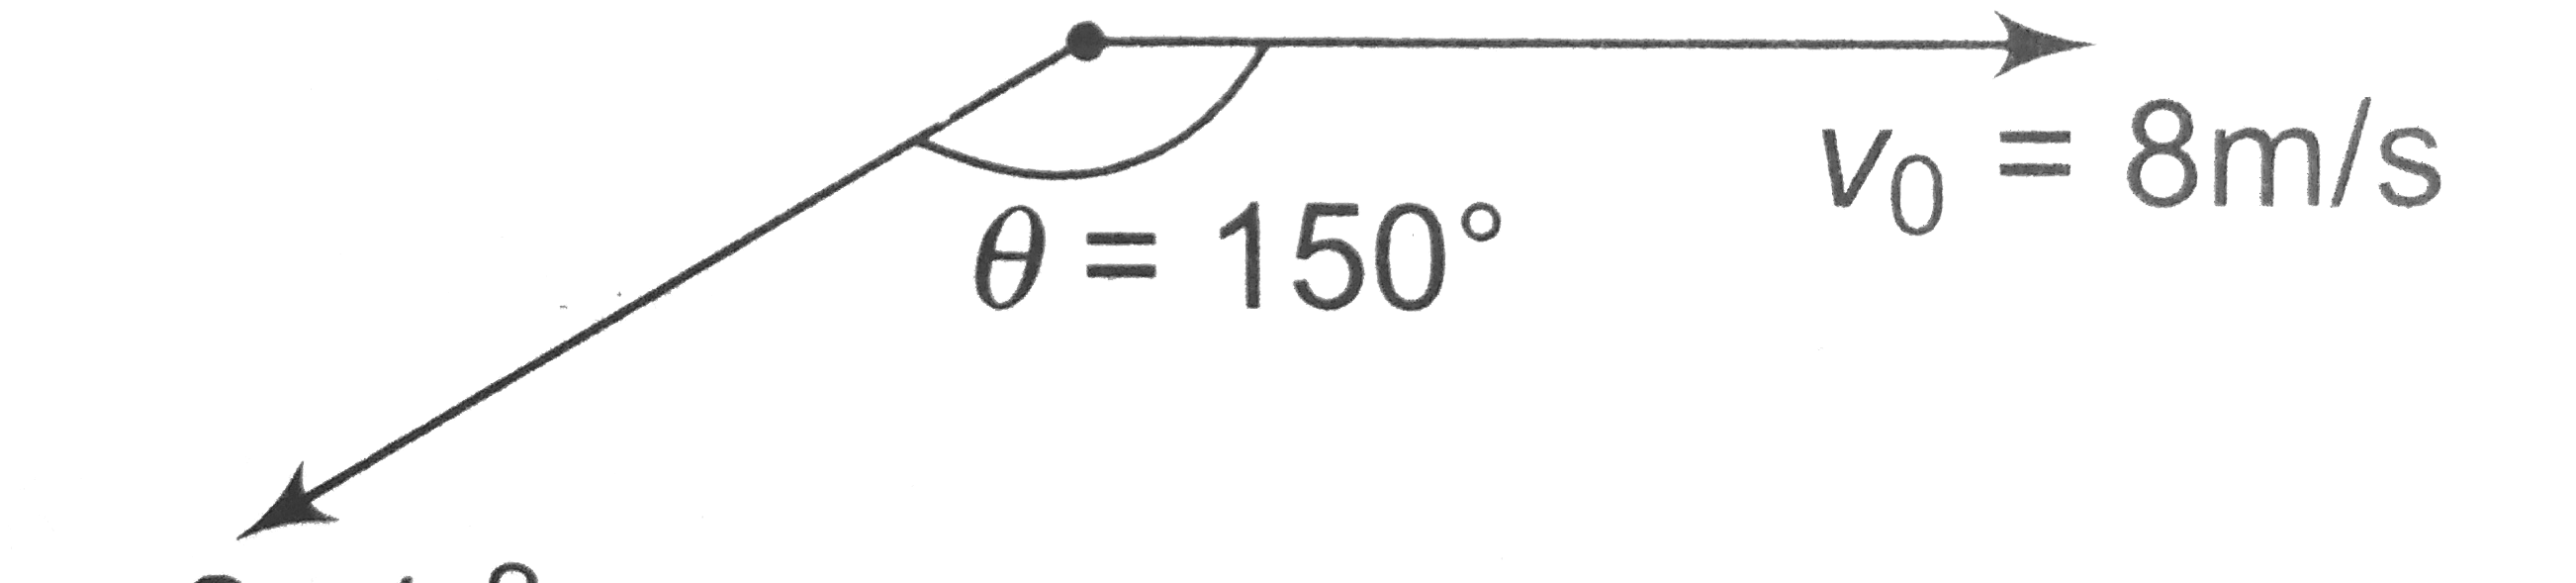 The figure shows th velocity and acceleration of a point like body at the initial moment of its motion. The acceleration  vector  of the body remain constant. The minimum radius of curvature of trajectory of the body is